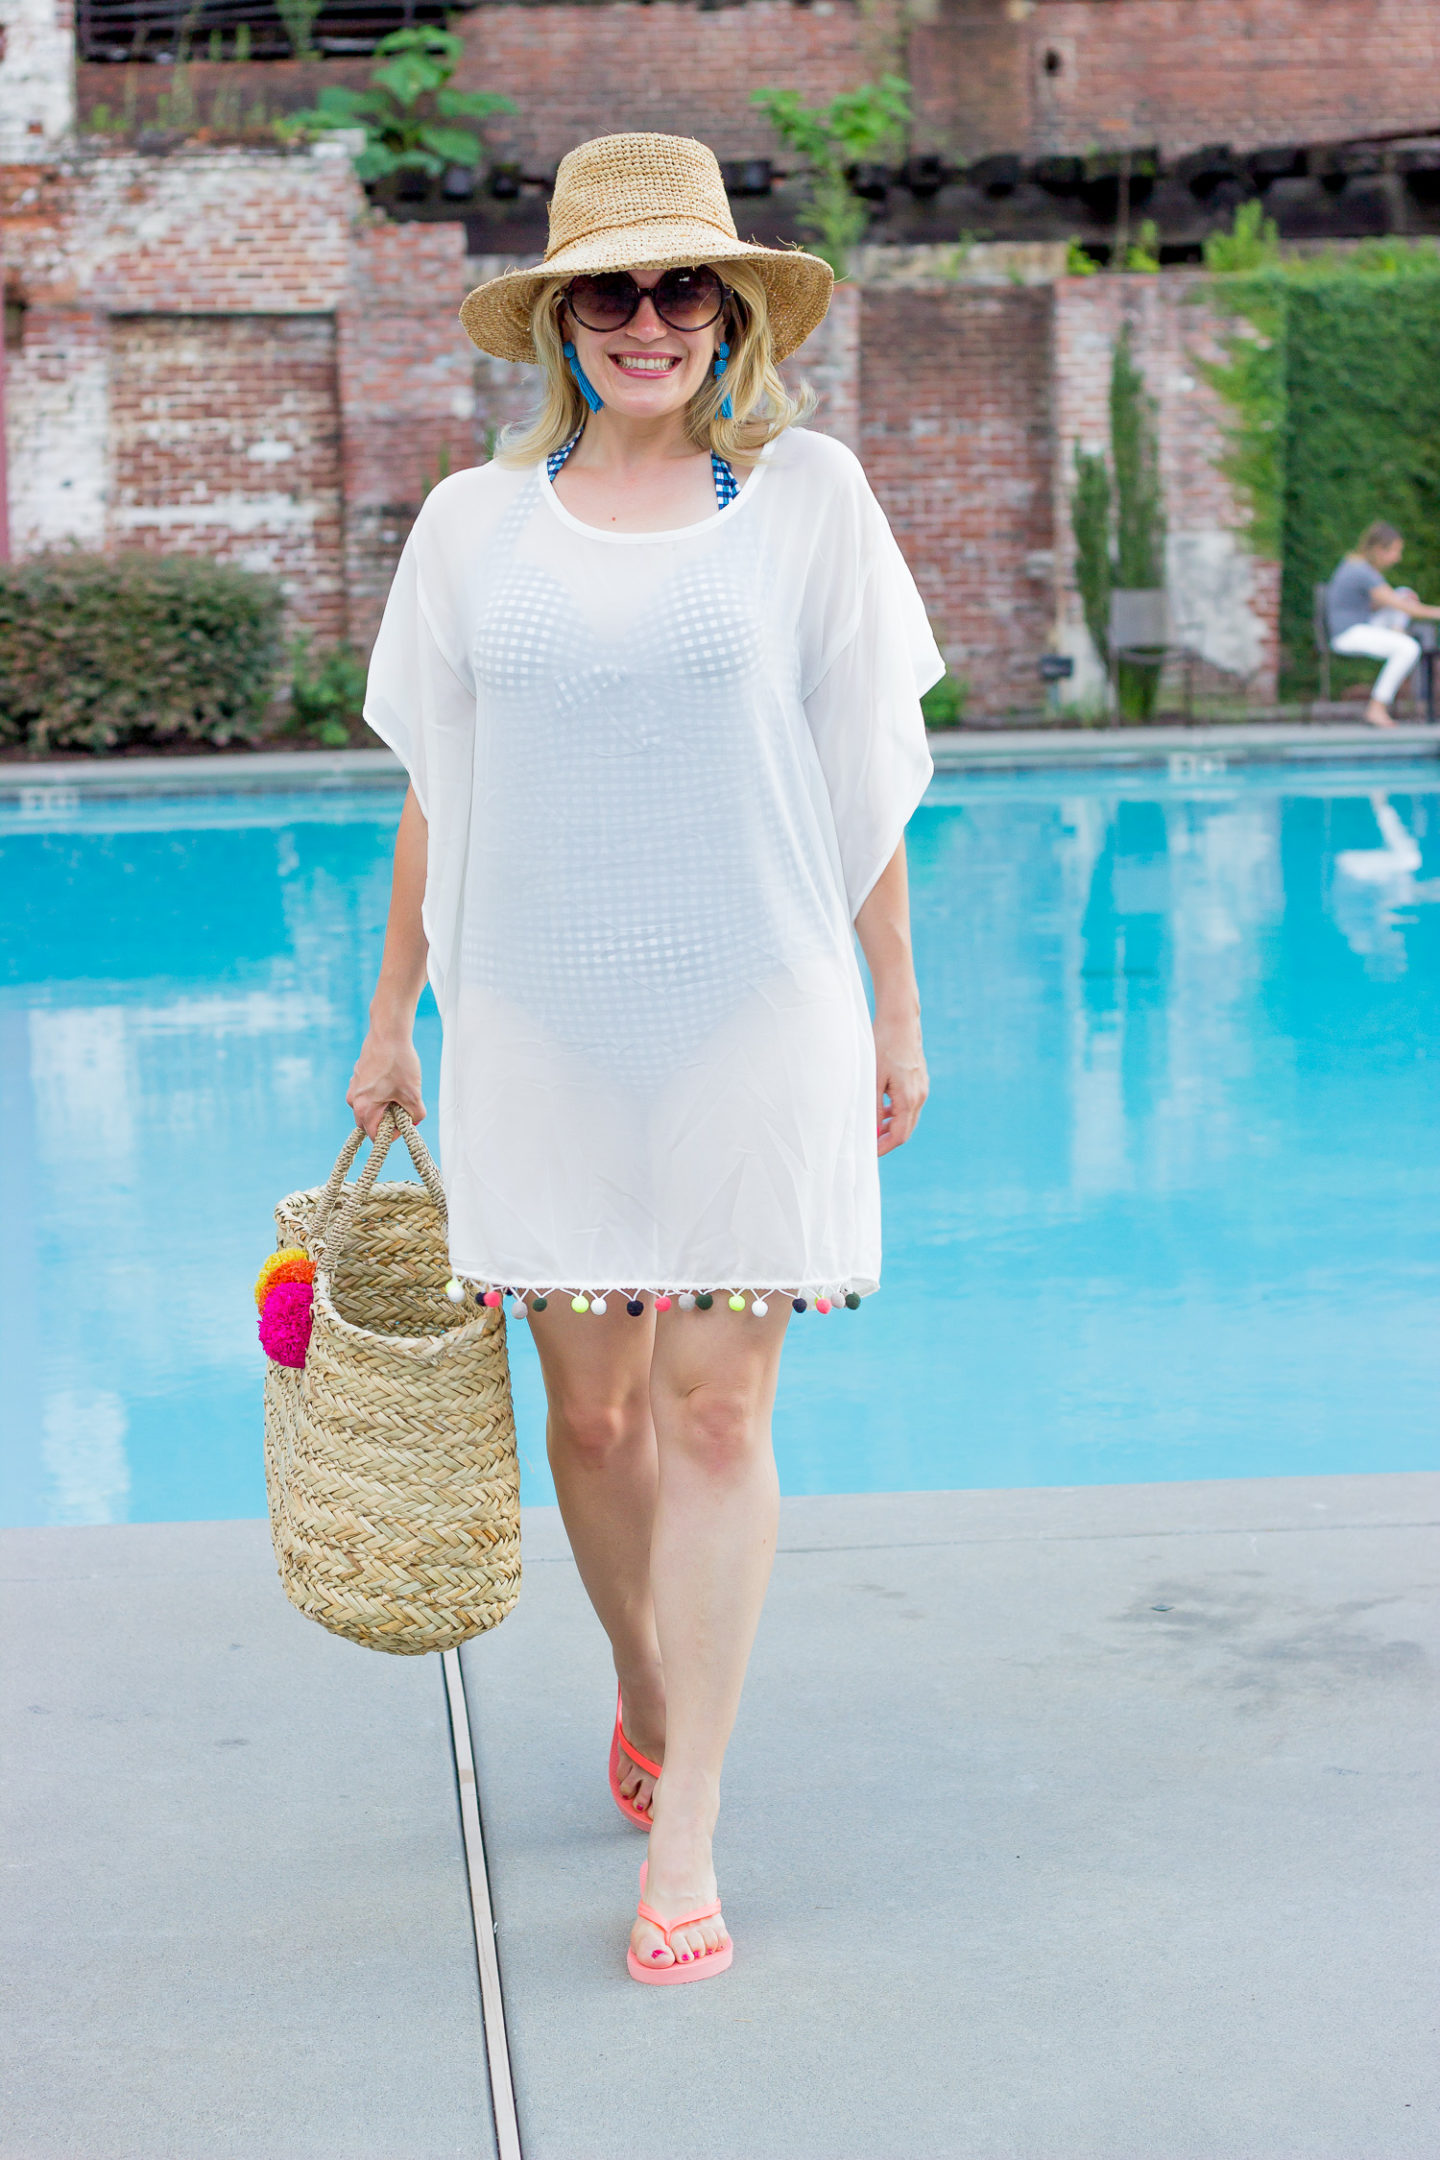 Target Pom Pom Cover Up worn by Elise Giannasi